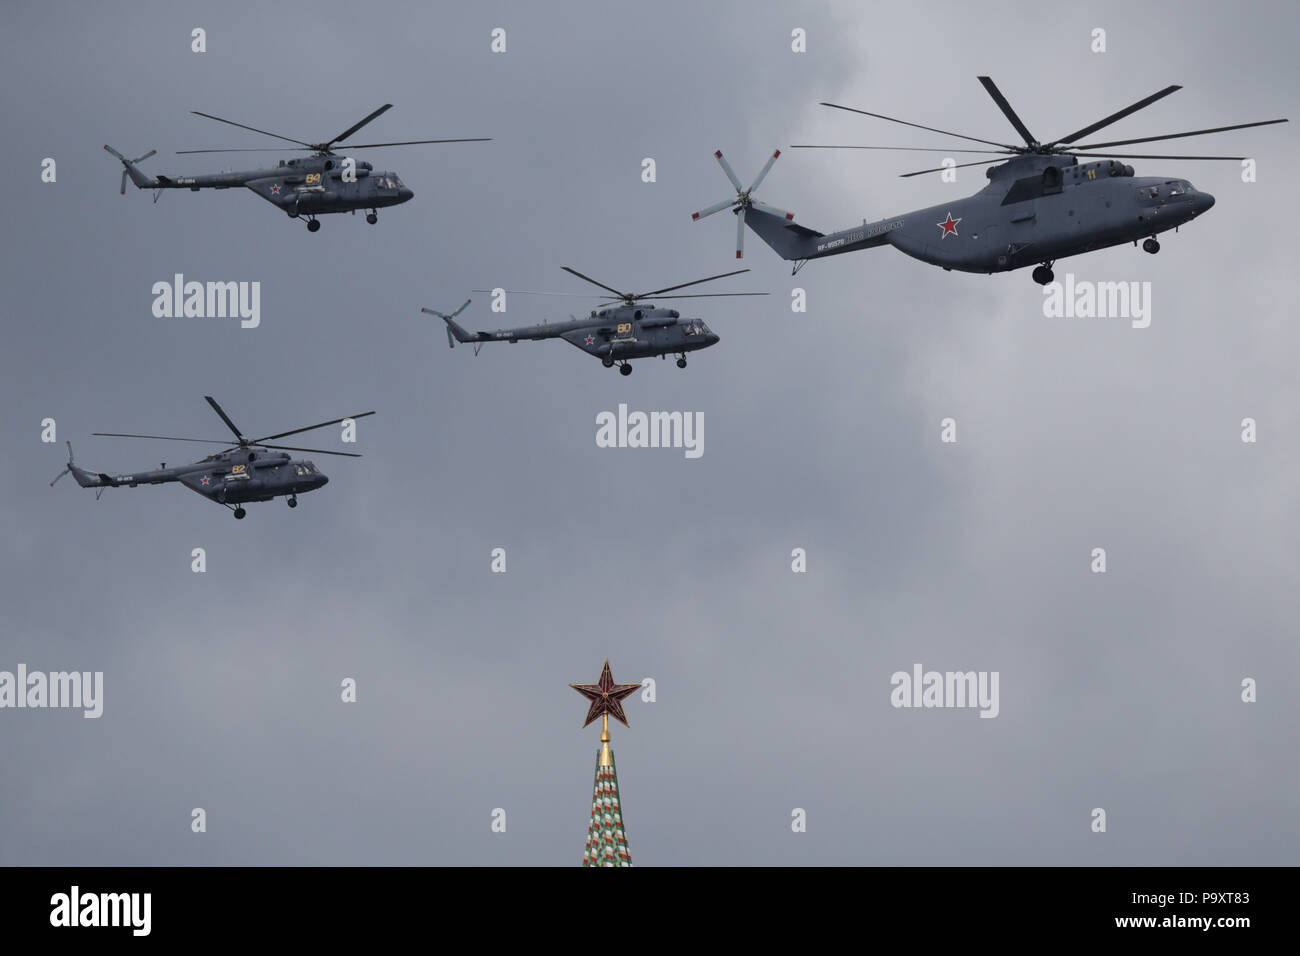 A formation of Mil Mi-26T and Mi-8 helicopters of Russian Air Force fly over the Kremlin of Moscow during a rehearsal for the Victory Day military par Stock Photo